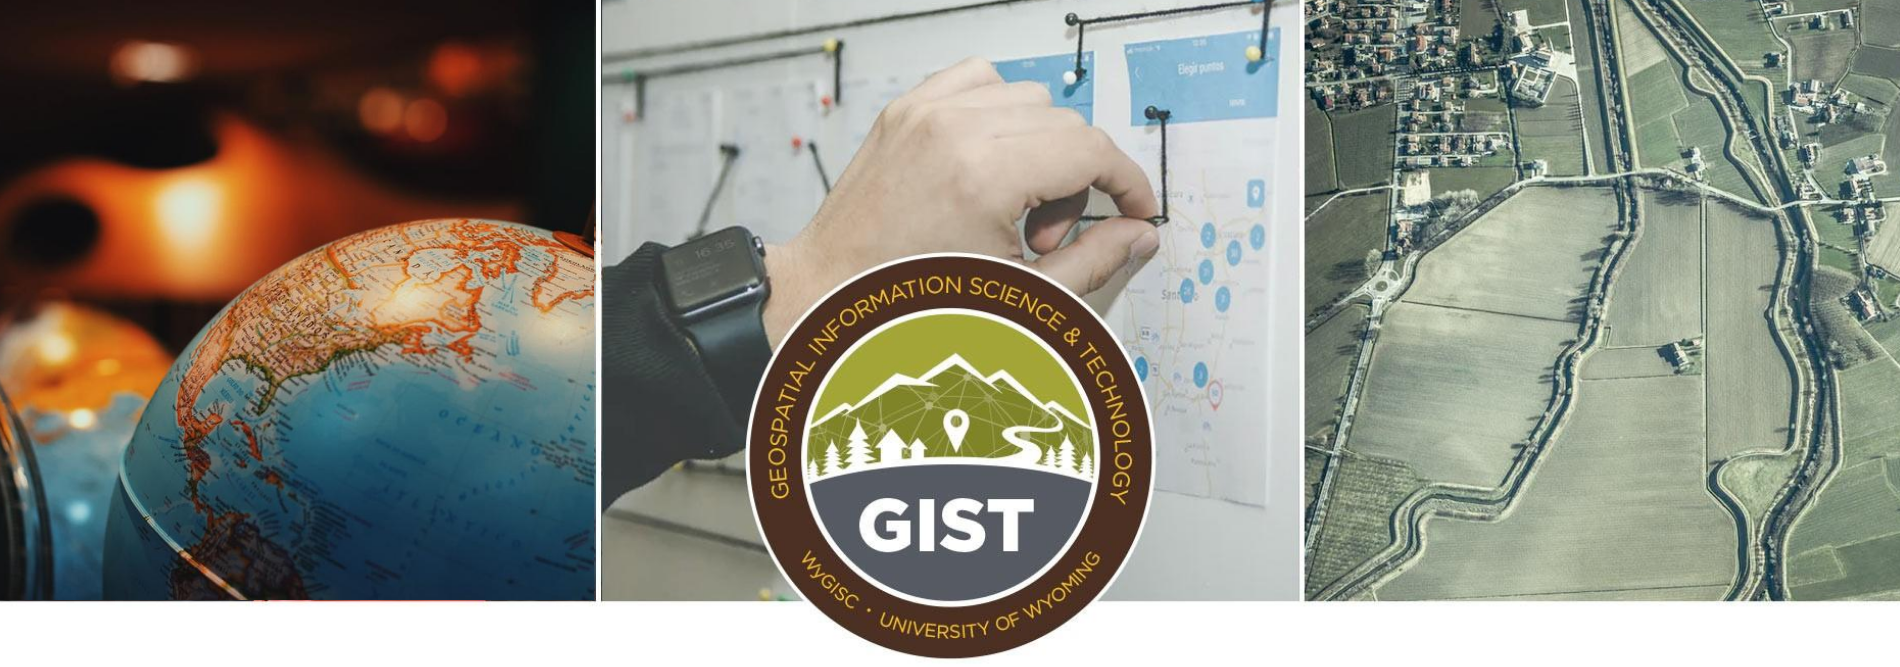 GIST logo and images 